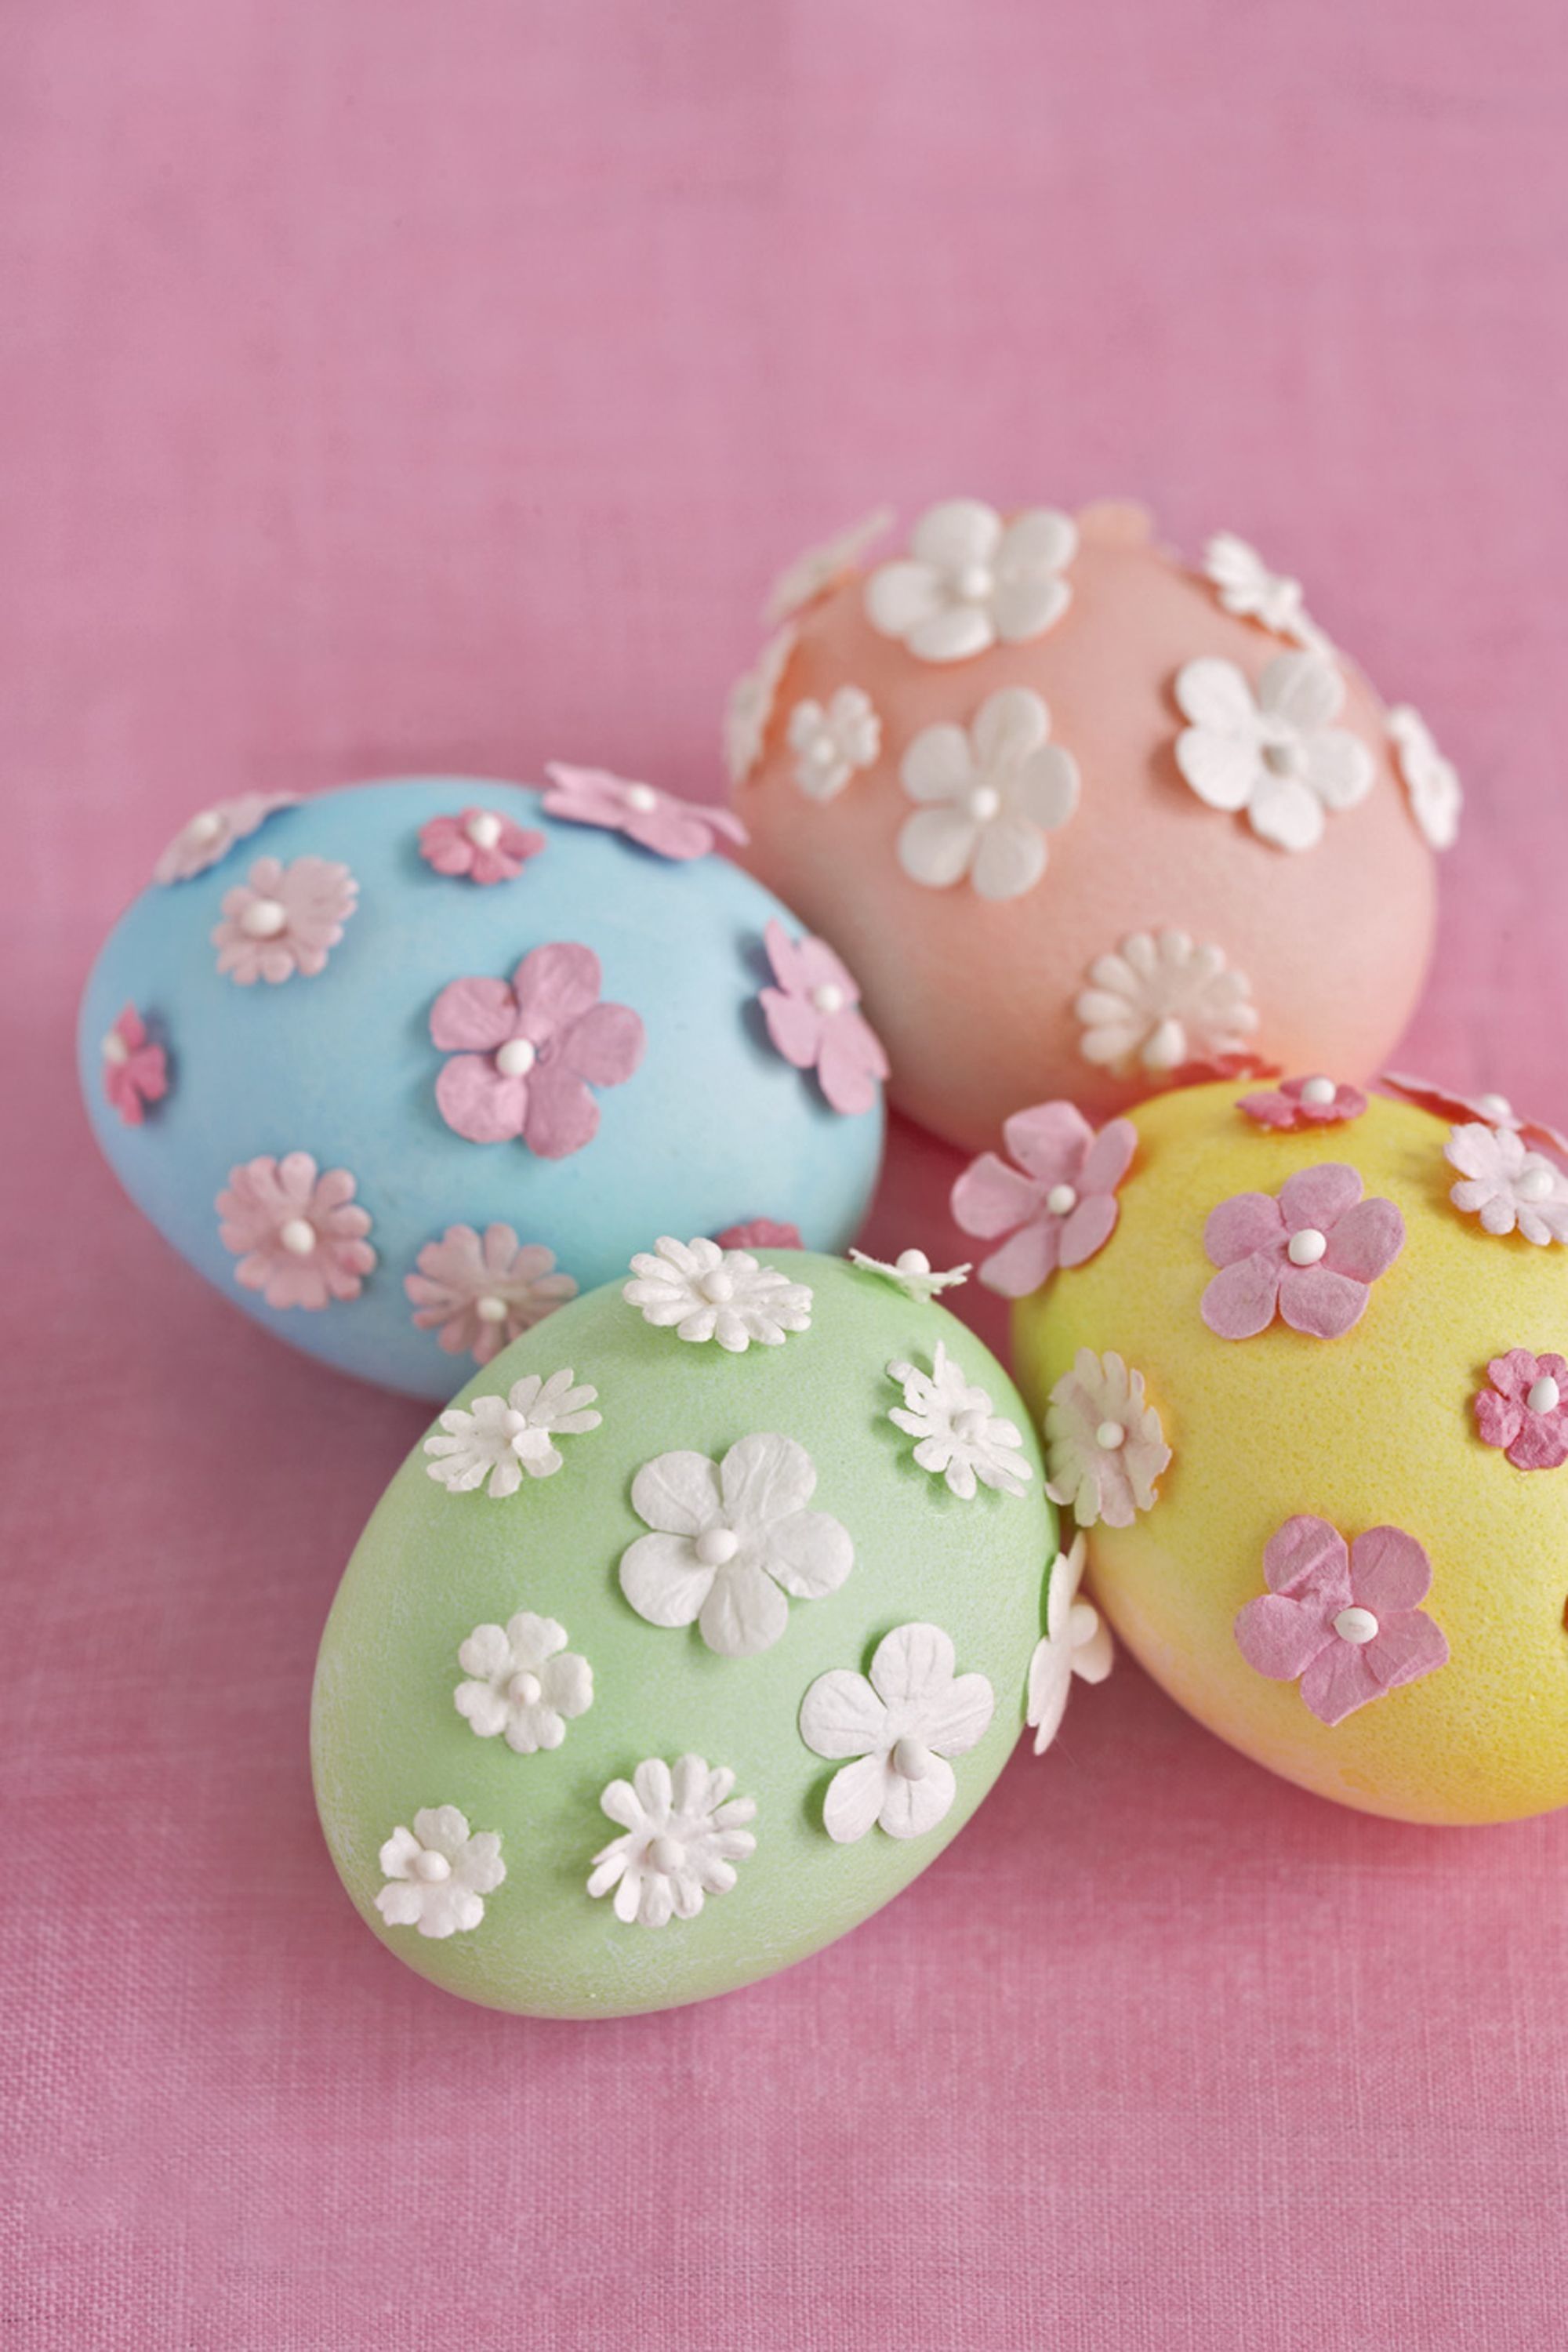 60 Best Easter Egg Designs & Decorations - Simple, Cute Ideas